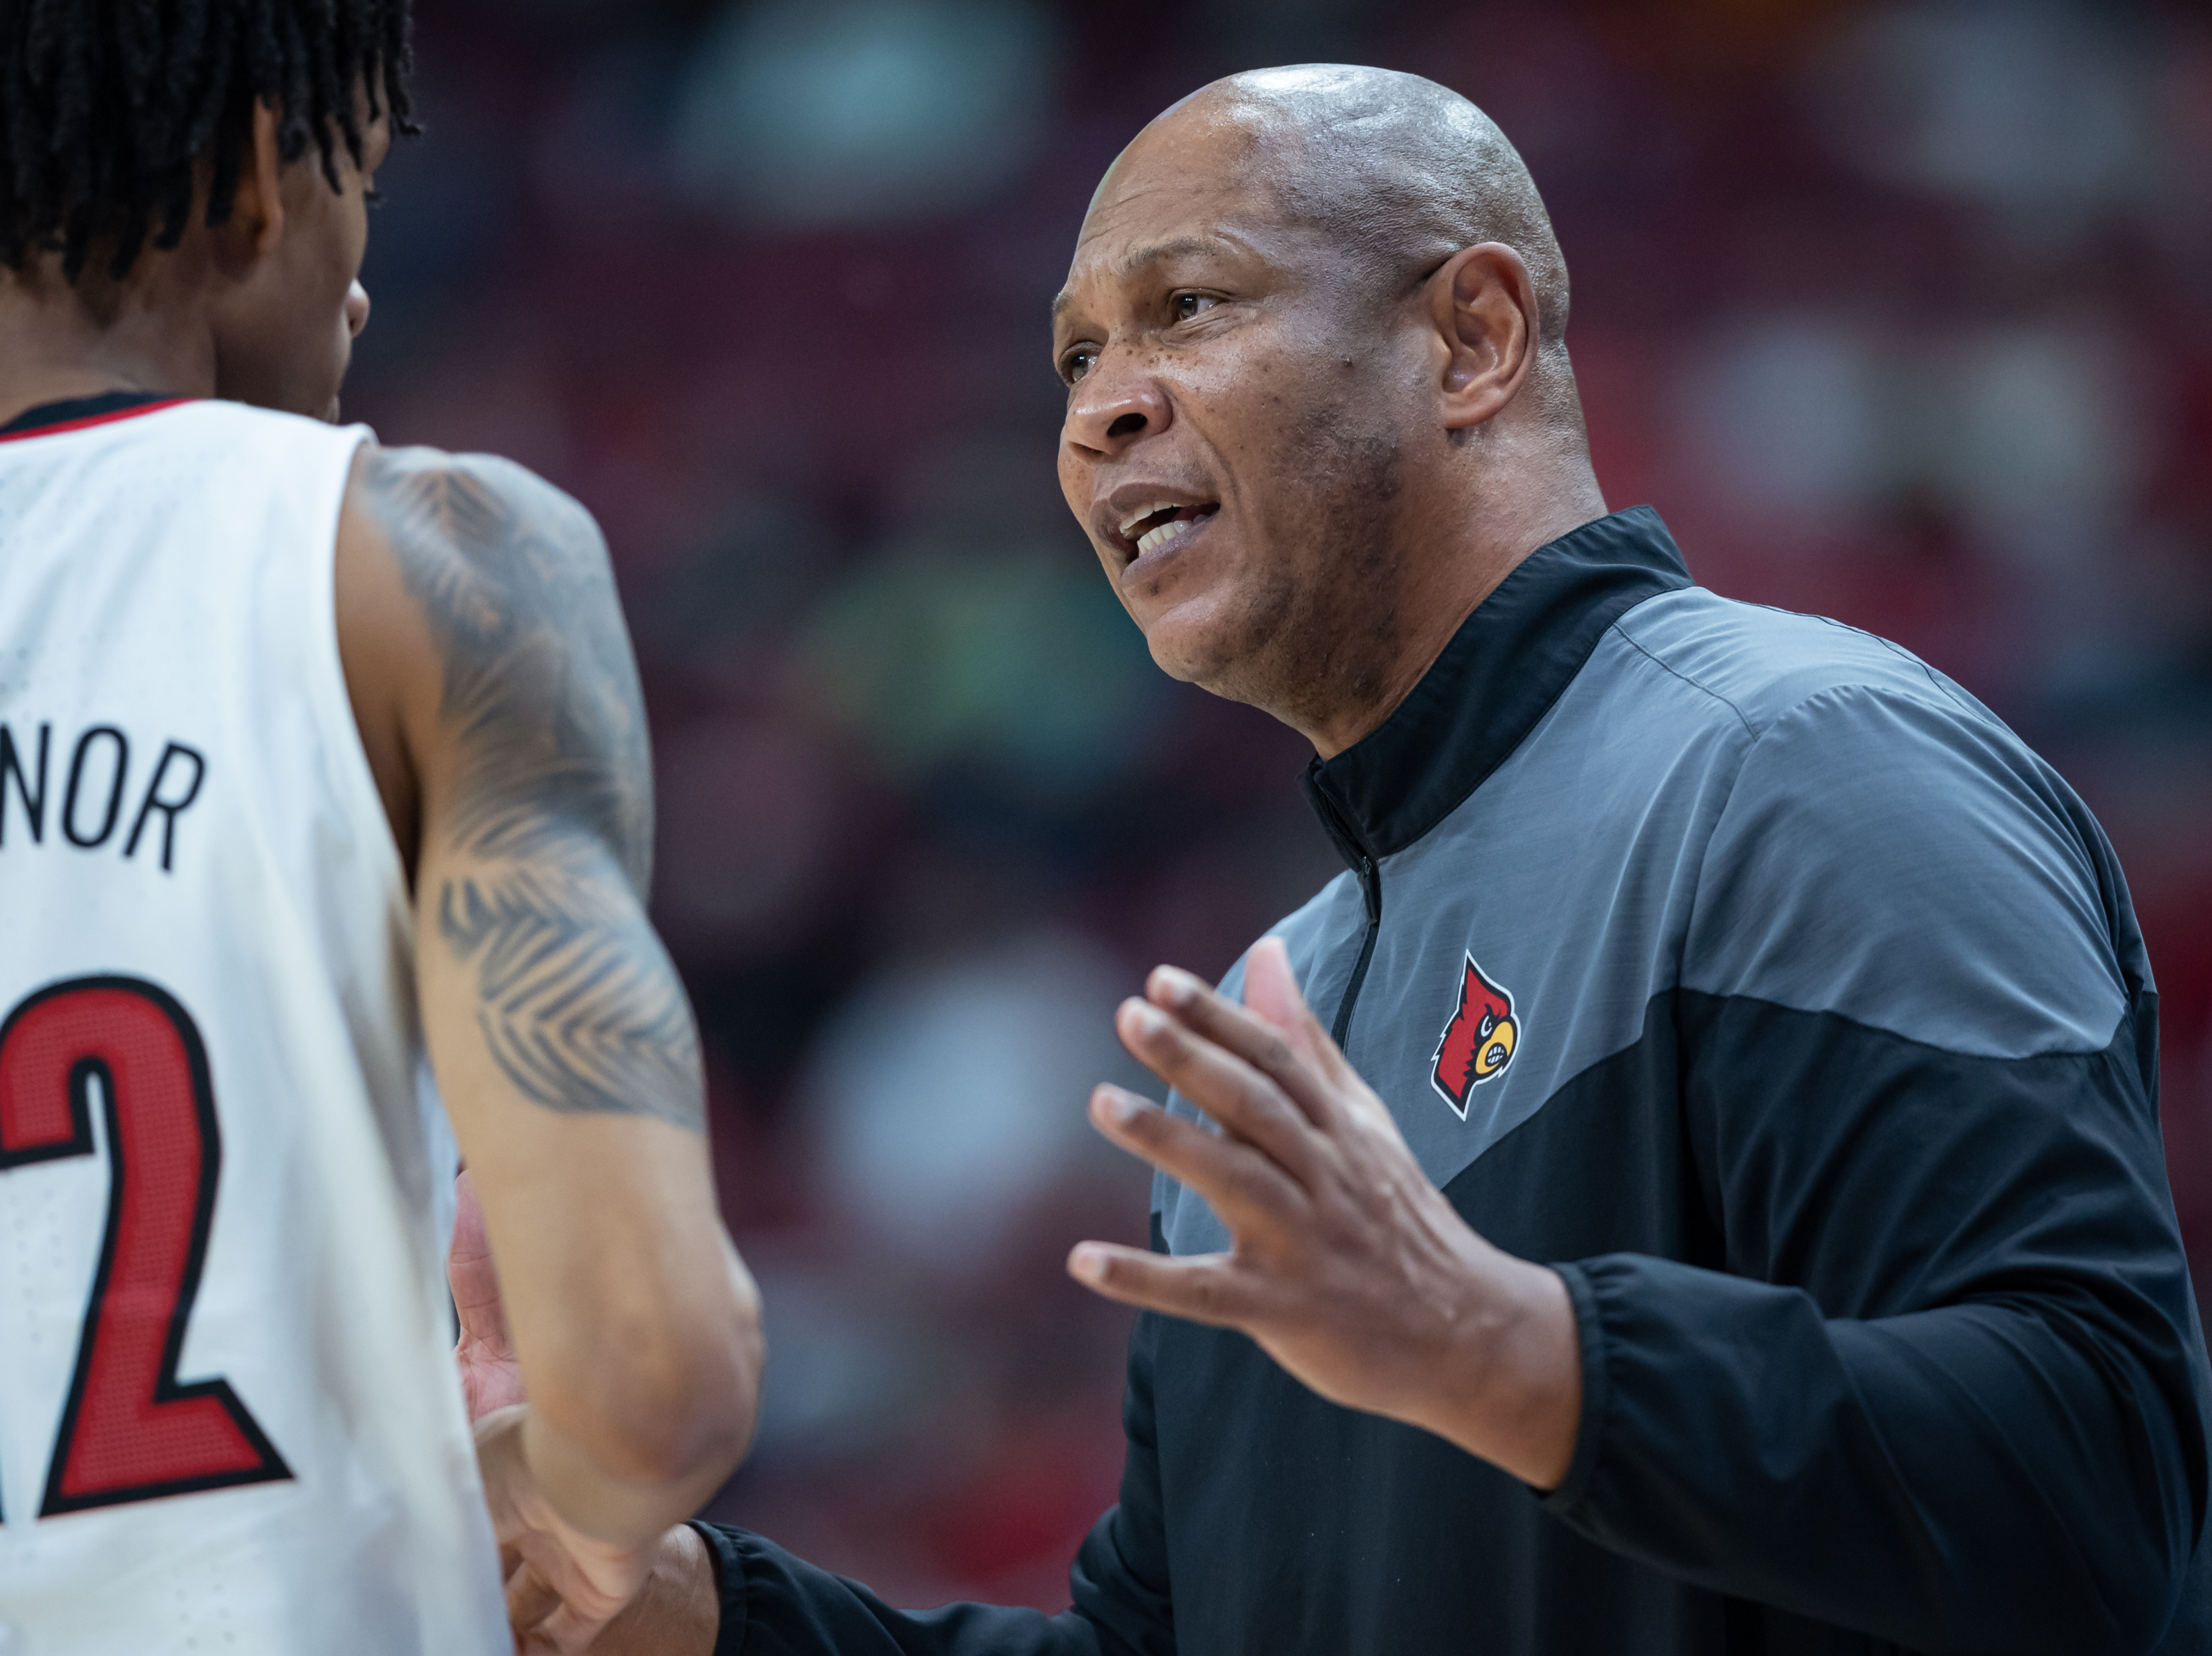 Kenny Payne back with the Cards, officially named UofL men's basketball  coach